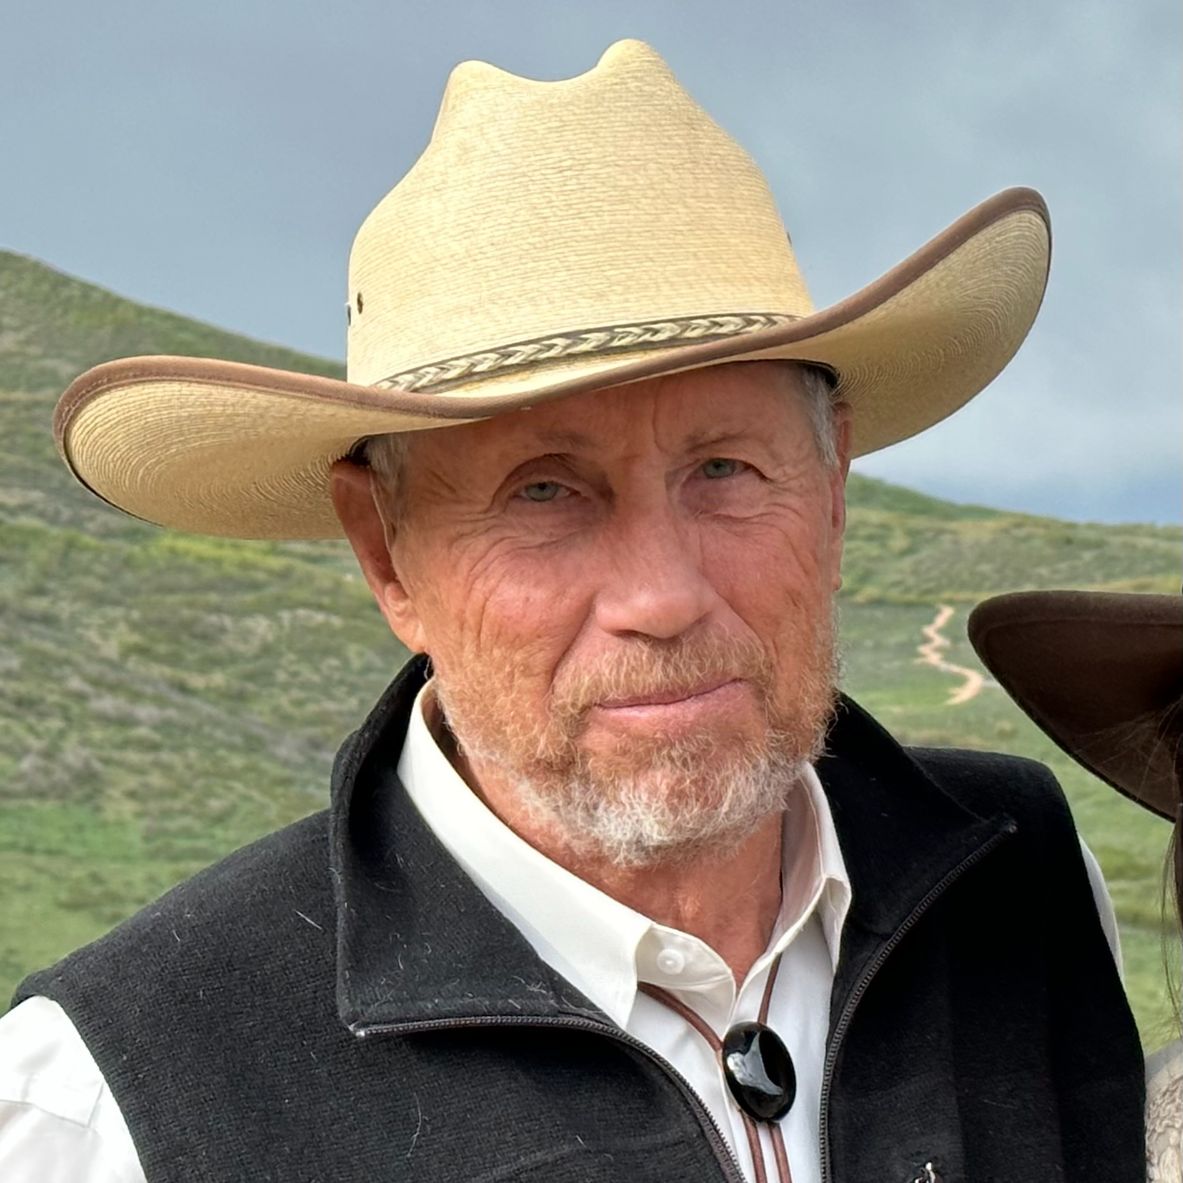 "Close-up portrait of Gregg Simonds, a man with a beard, wearing a straw cowboy hat, a white collared shirt, and a black vest. He is set against a backdrop of rolling green hills under a cloudy sky."